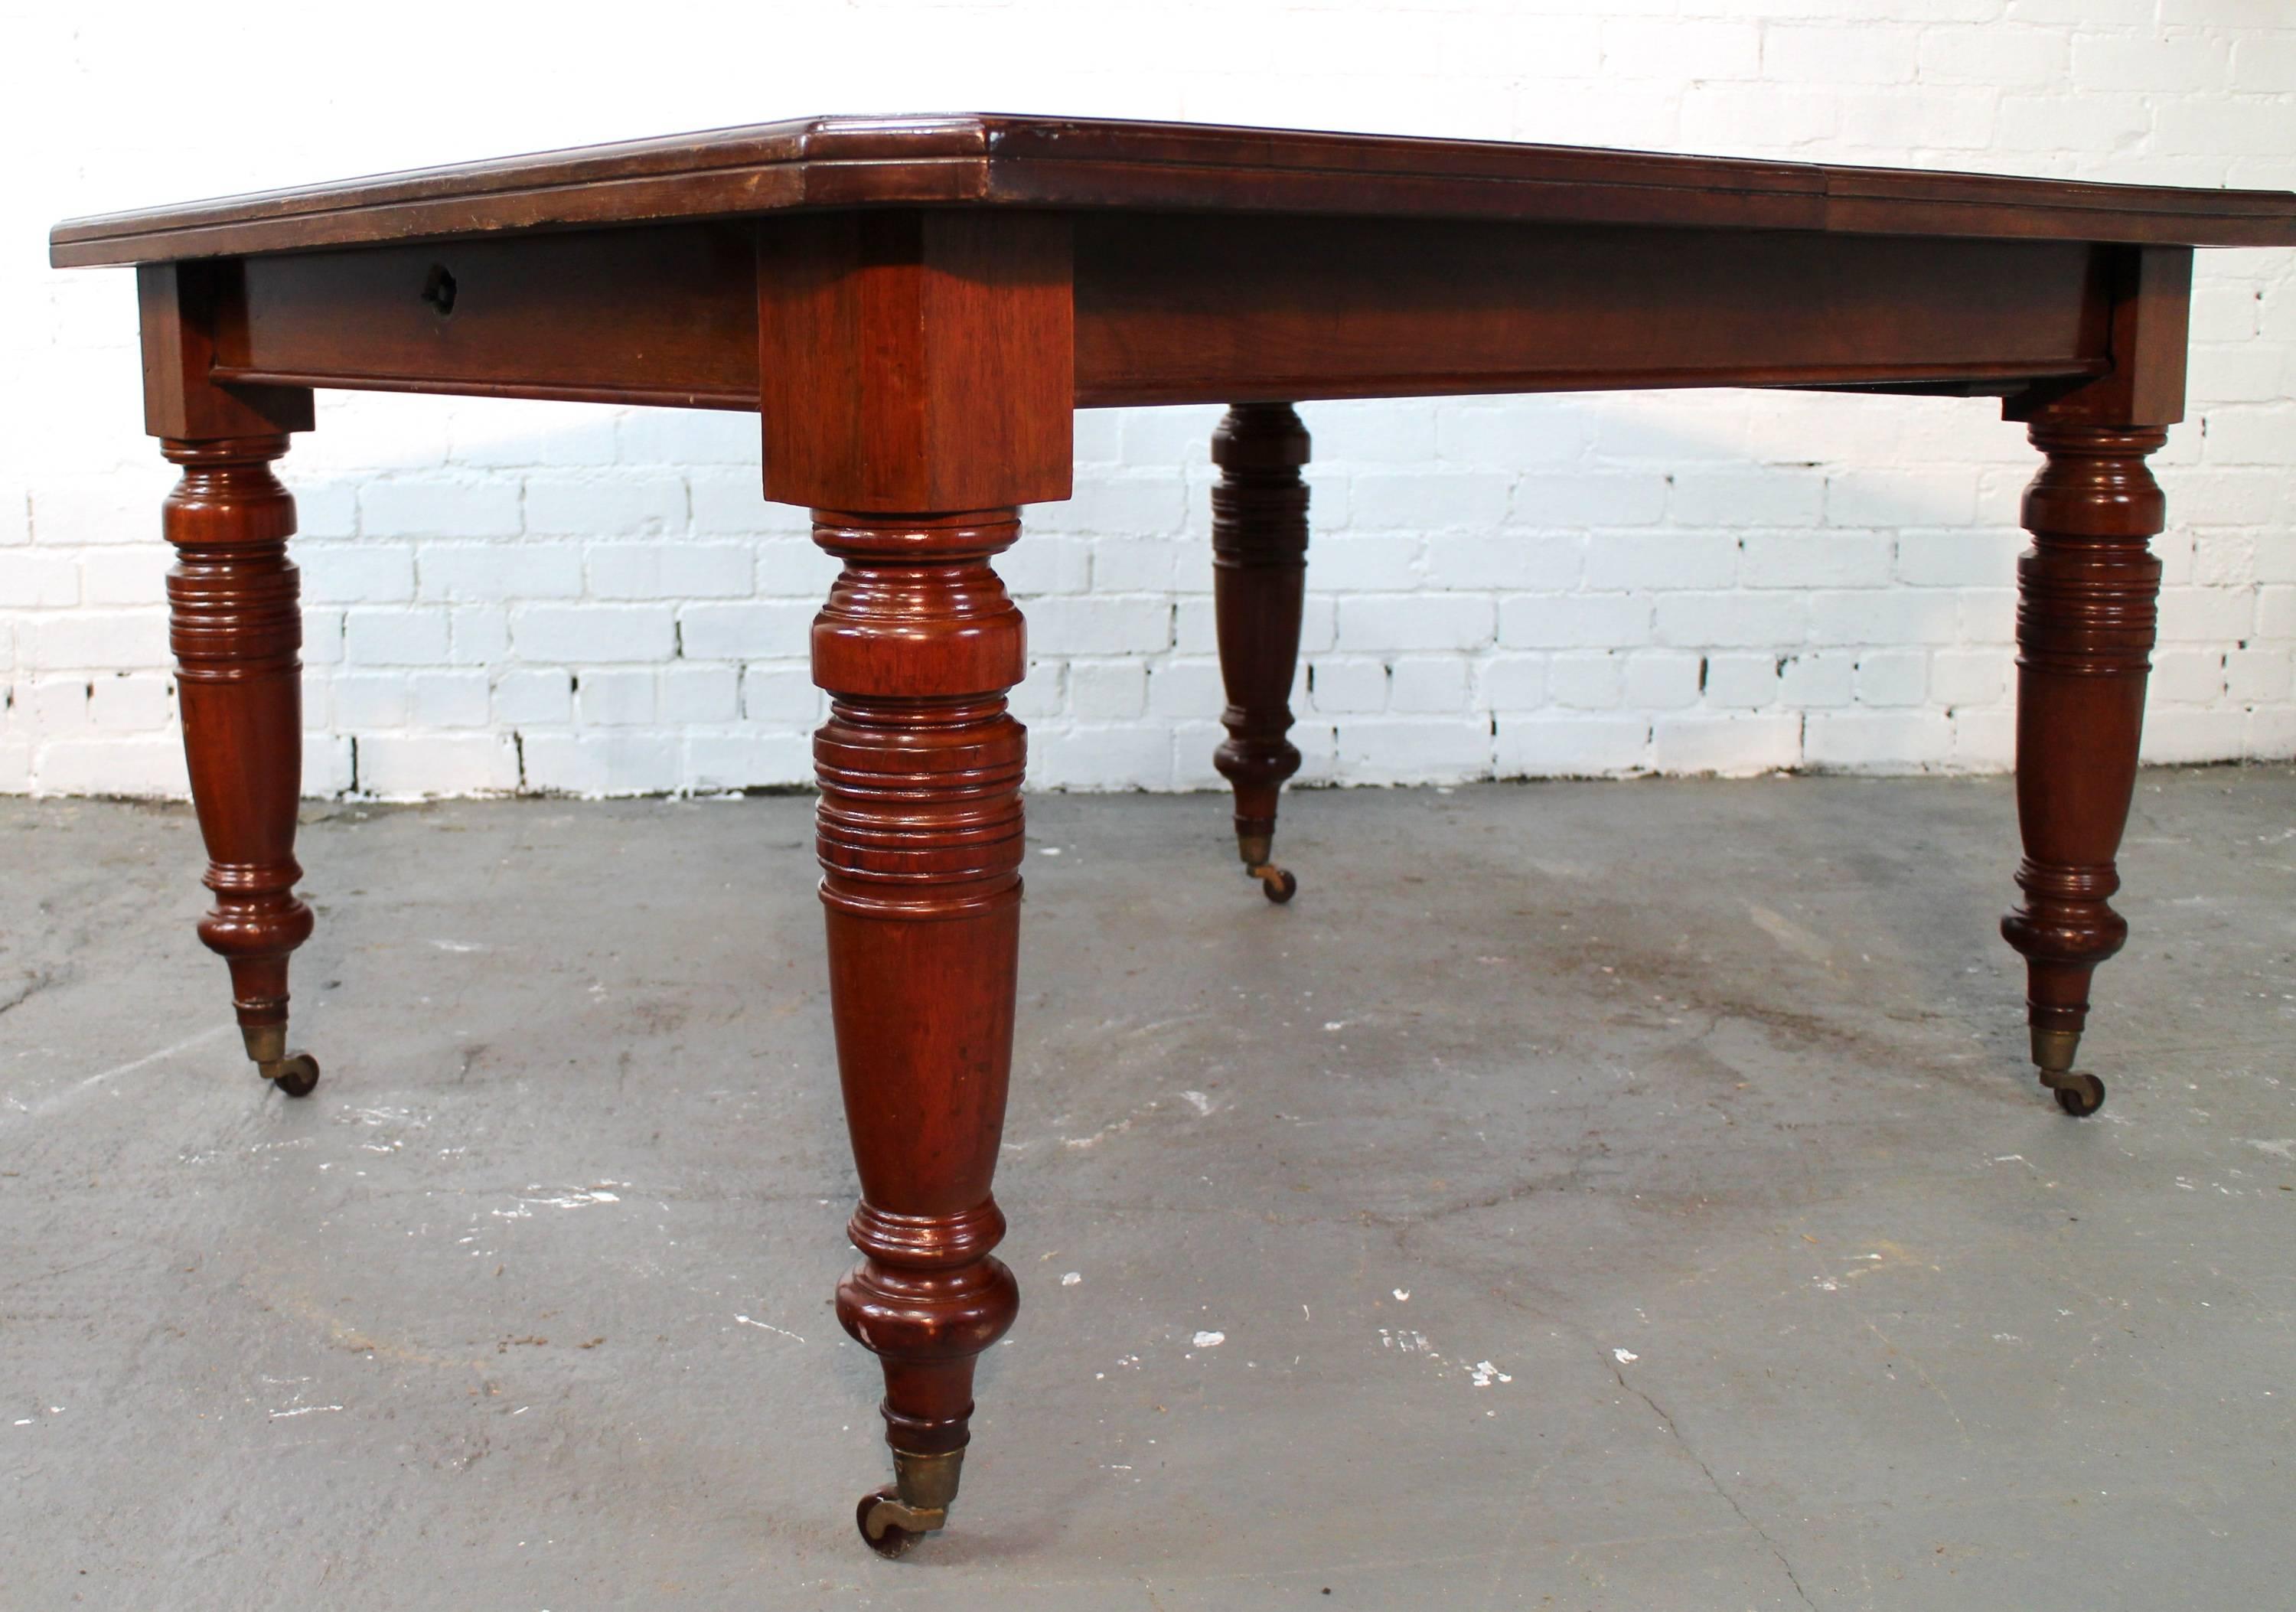 Late 19th Century Antique Victorian Mahogany Extending Dining Table and Two Leaves, Seats 10